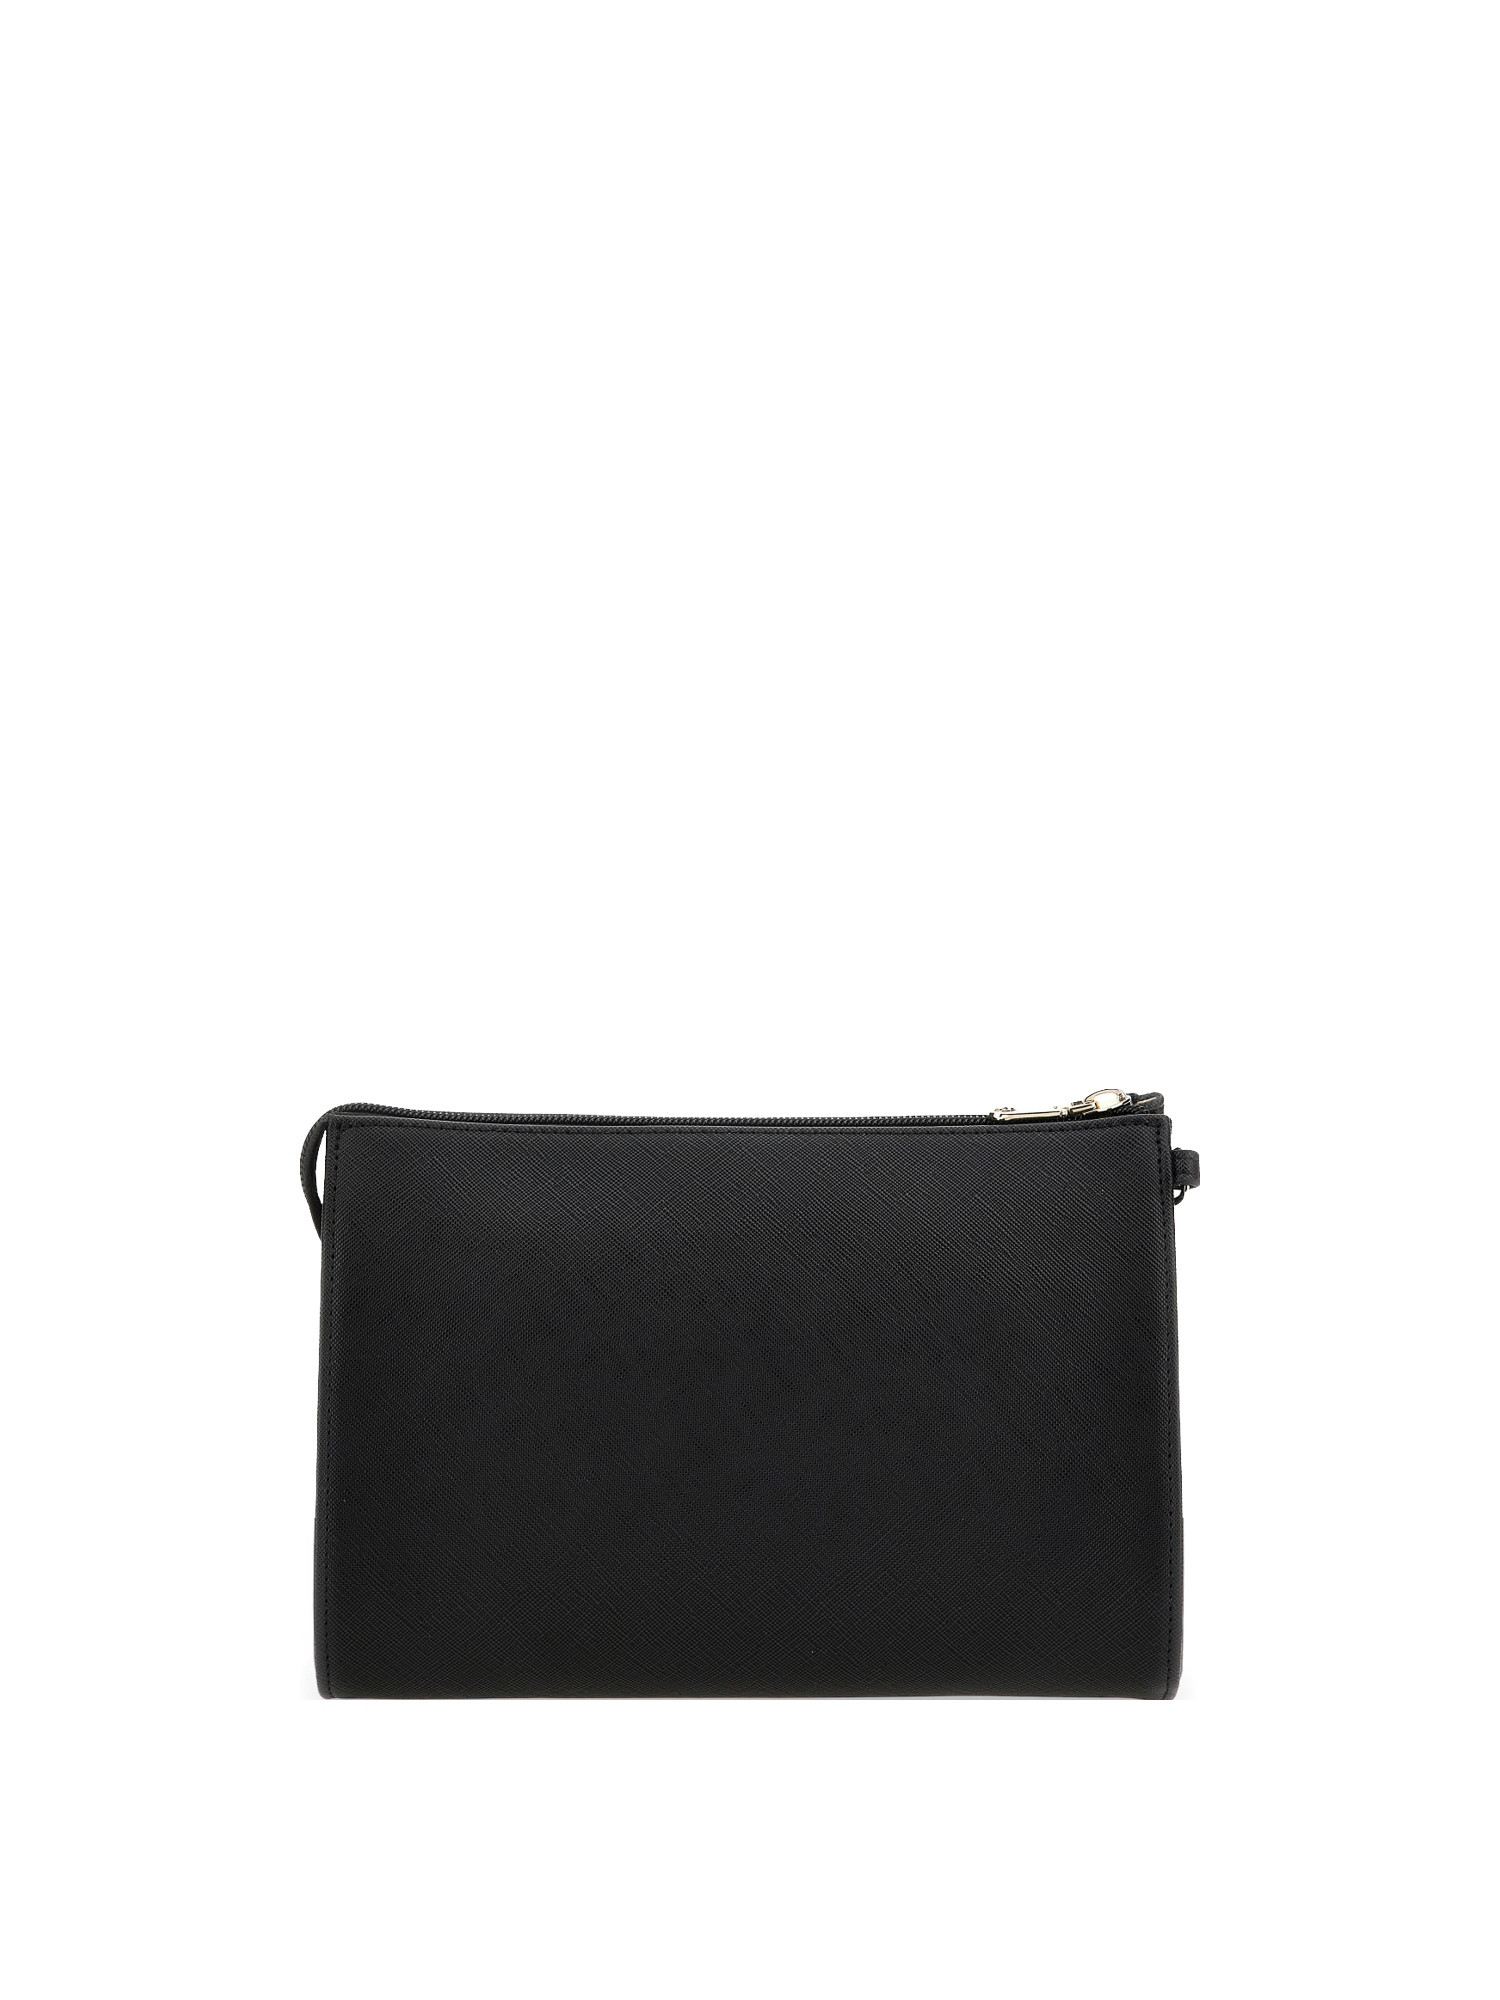 Guess - Logo pouch, Black, large image number 1